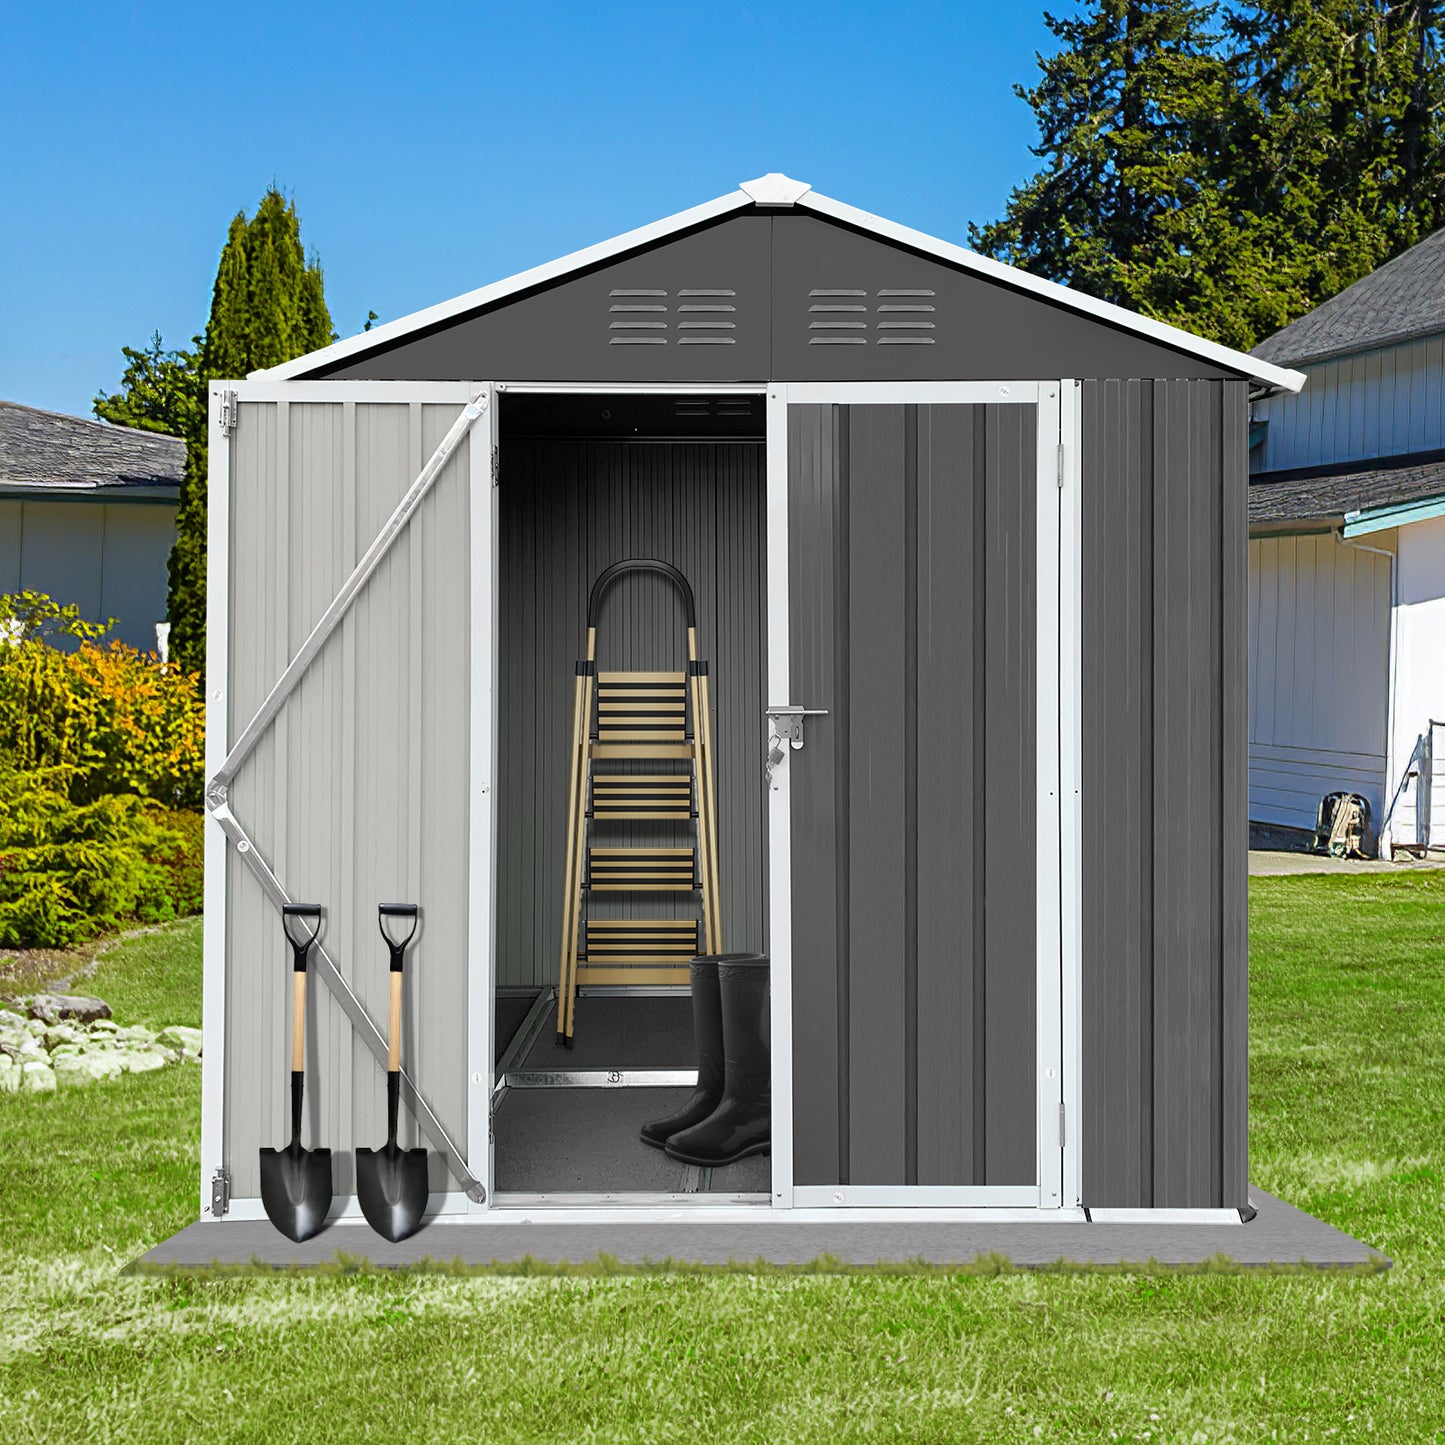 SYNGAR 6' x 4' Outdoor Storage Shed, Metal Garden Shed with Lockable Doors, Tools Storage Shed for Backyard, Patio, Lawn, D9094